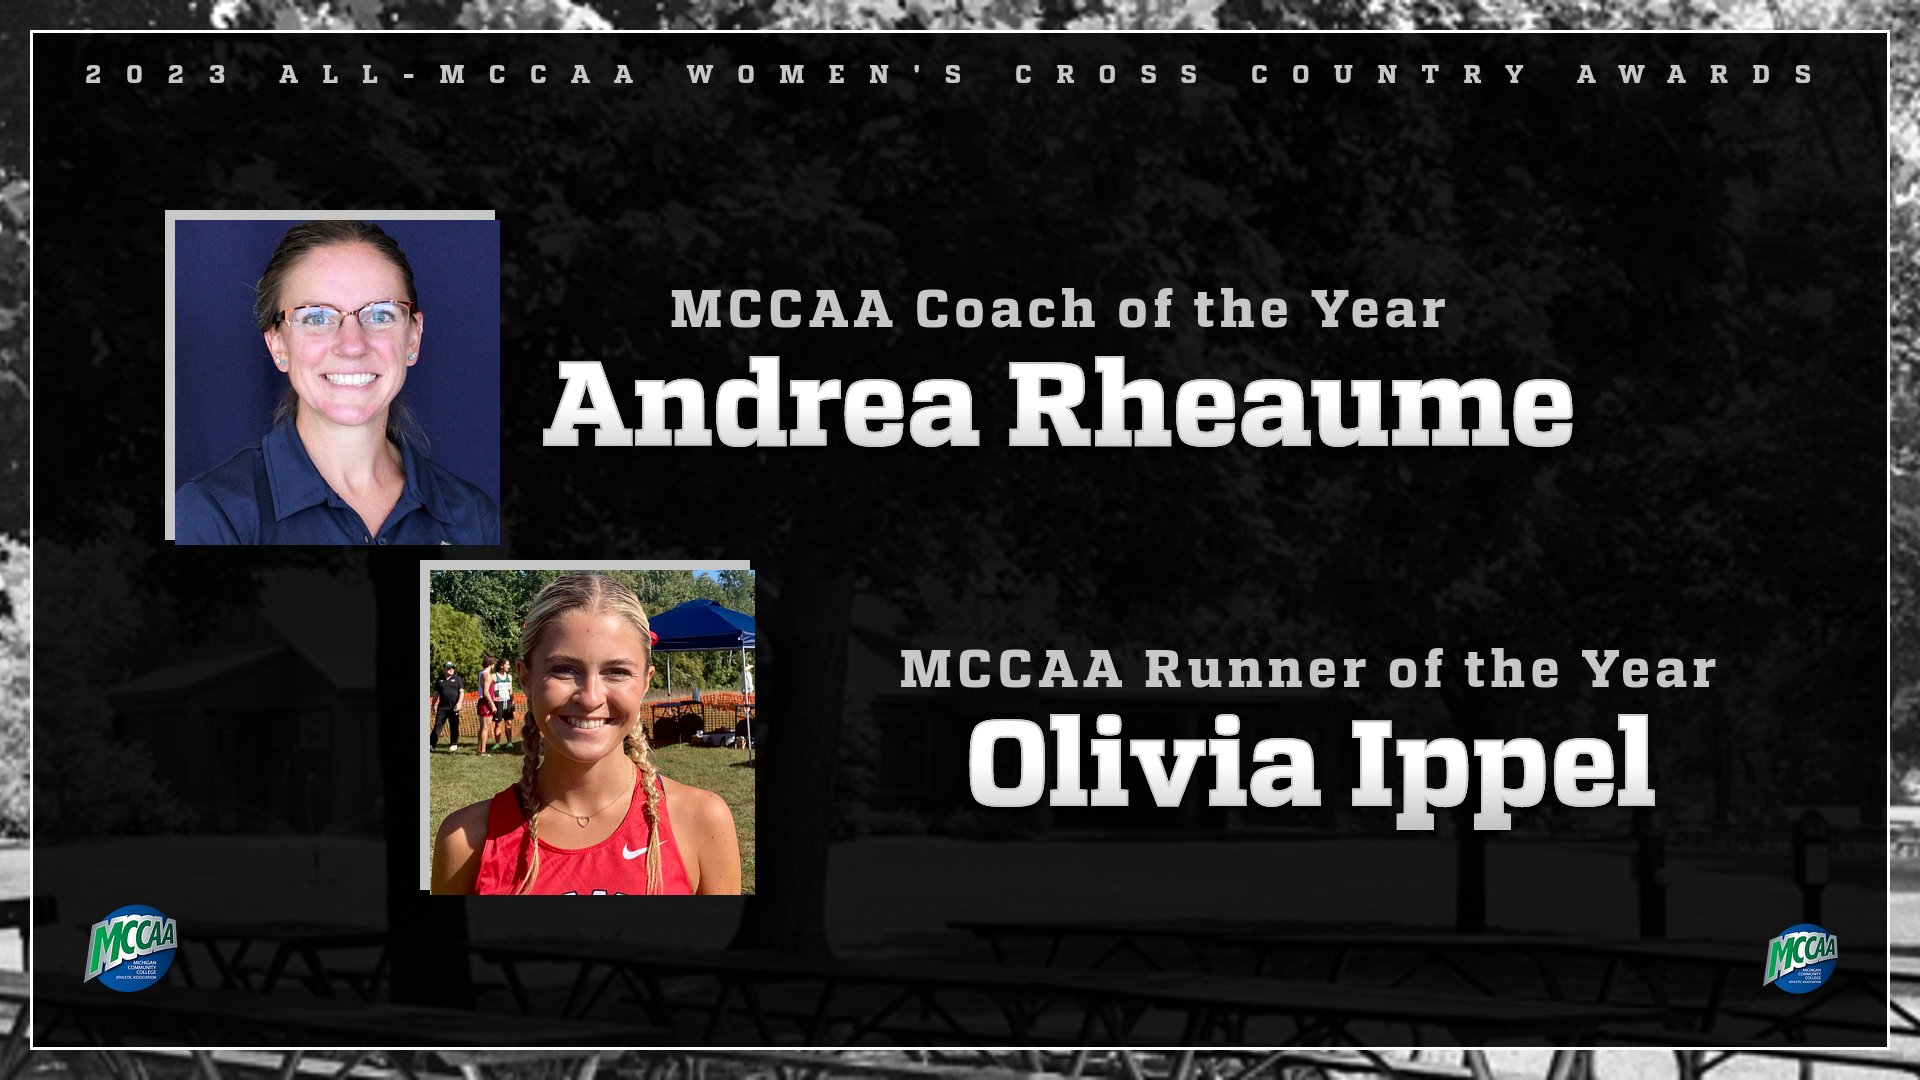 Ippel, Rheaume Take Top Billing with 2023 All-MCCAA Women's Cross Country Awards